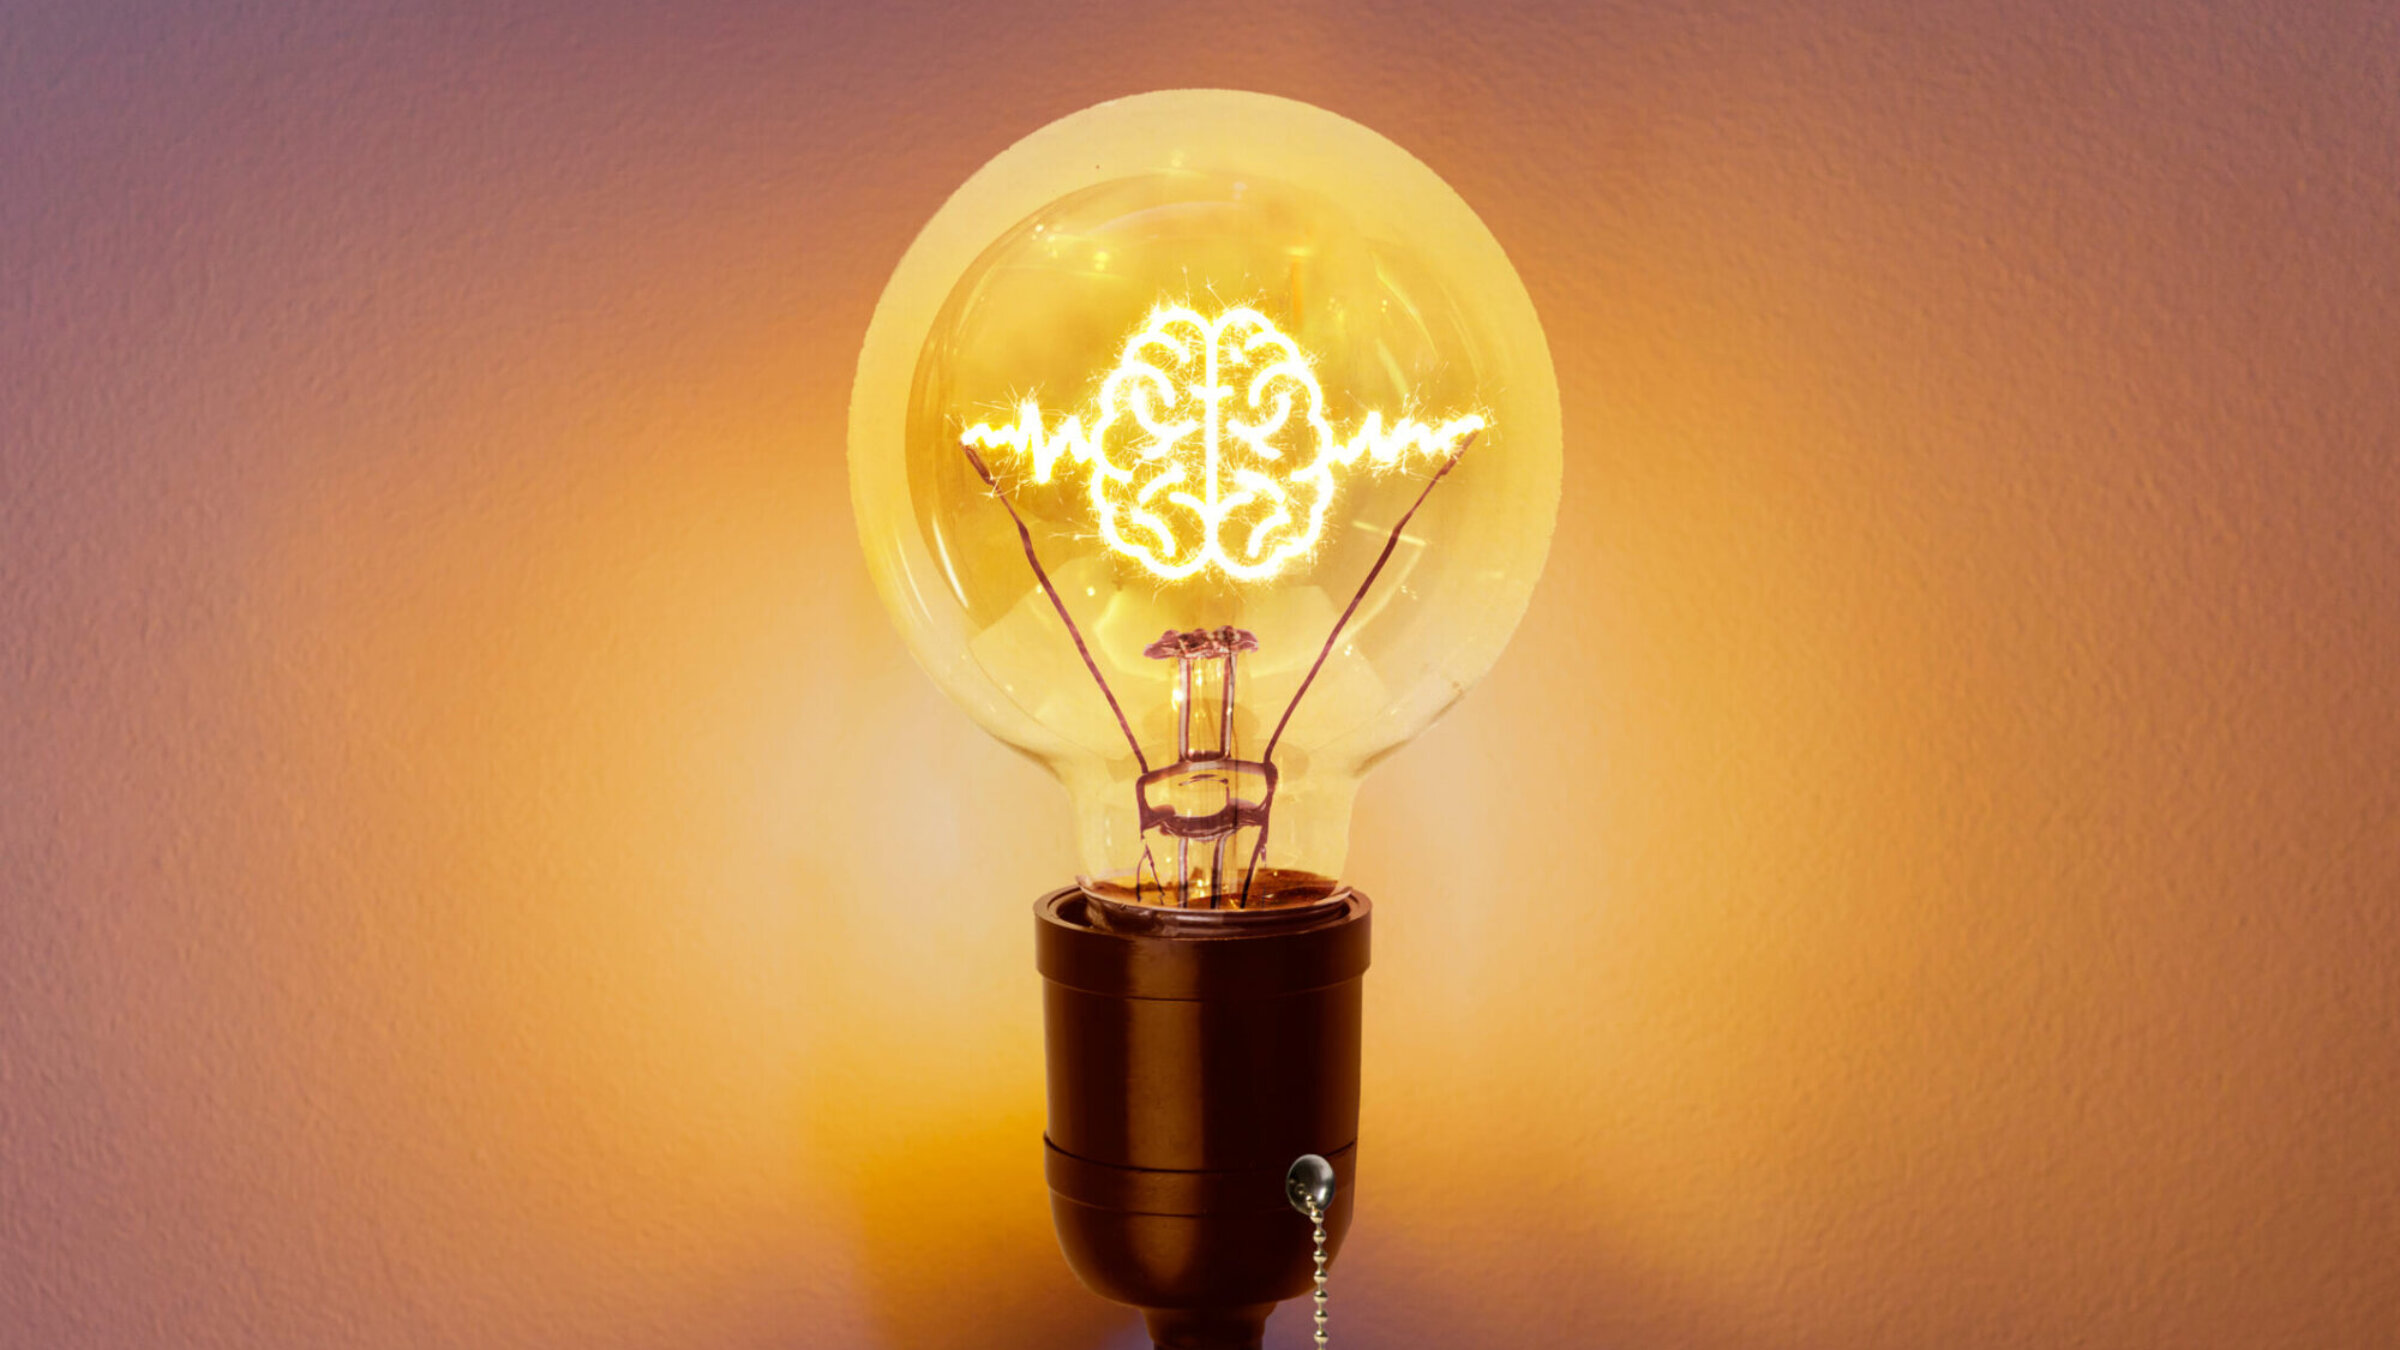 The lightbulb, often used as a symbol for a new idea, was invented by Thomas Edison. He was not Jewish.